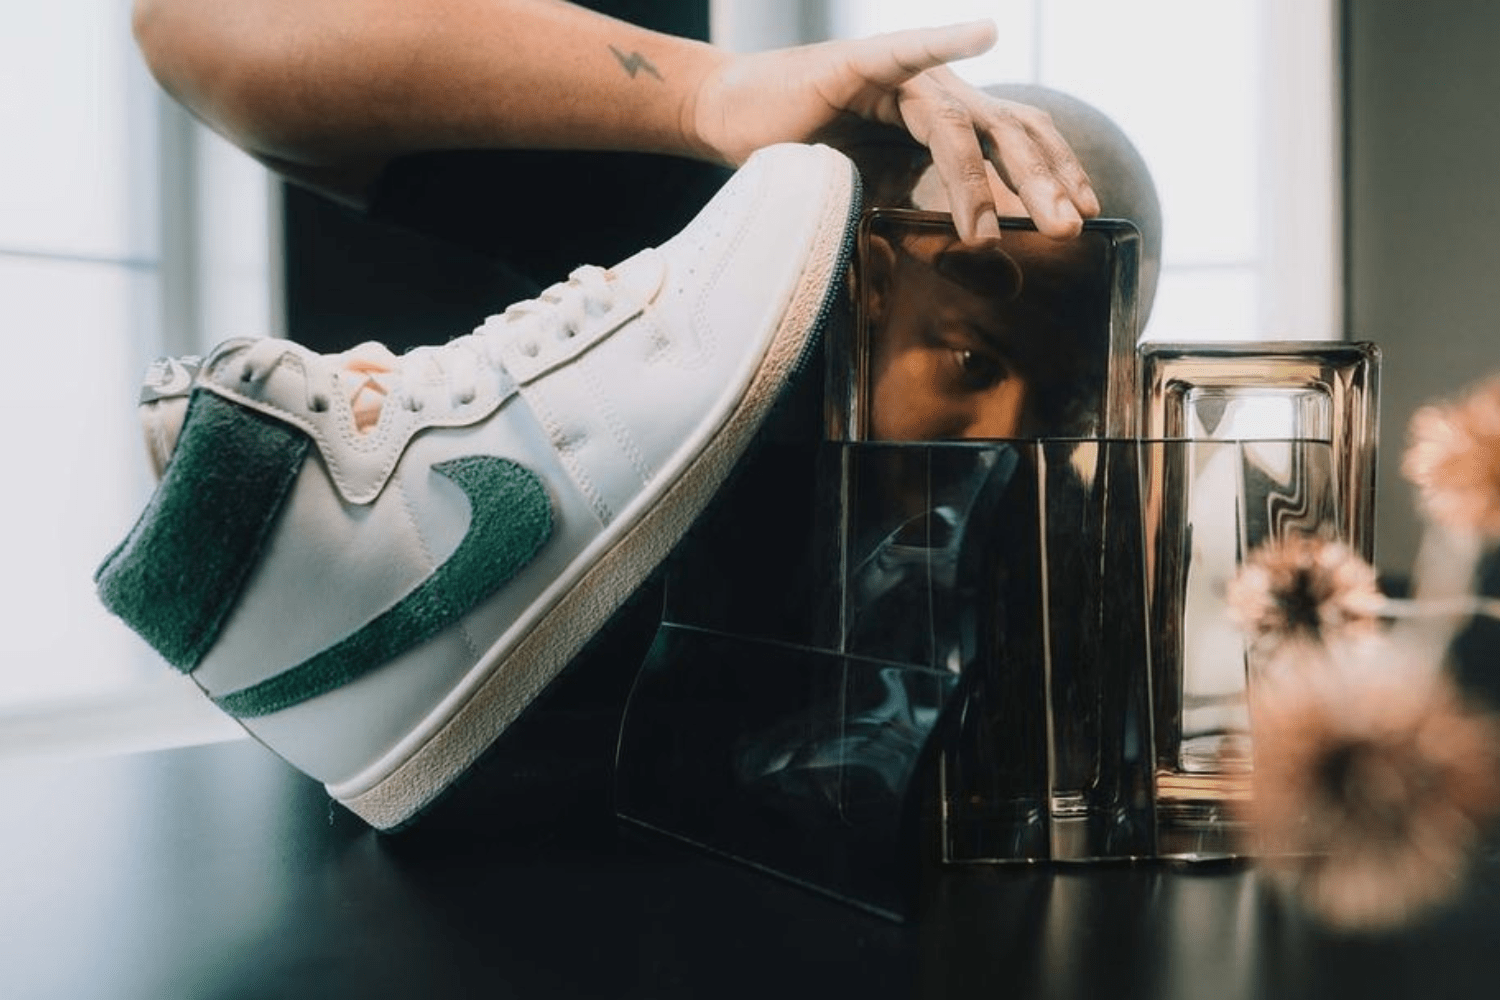 The A Ma Maniére x Nike Air Ship 'Green Stone' appears in 'Obsess The Details' campaign